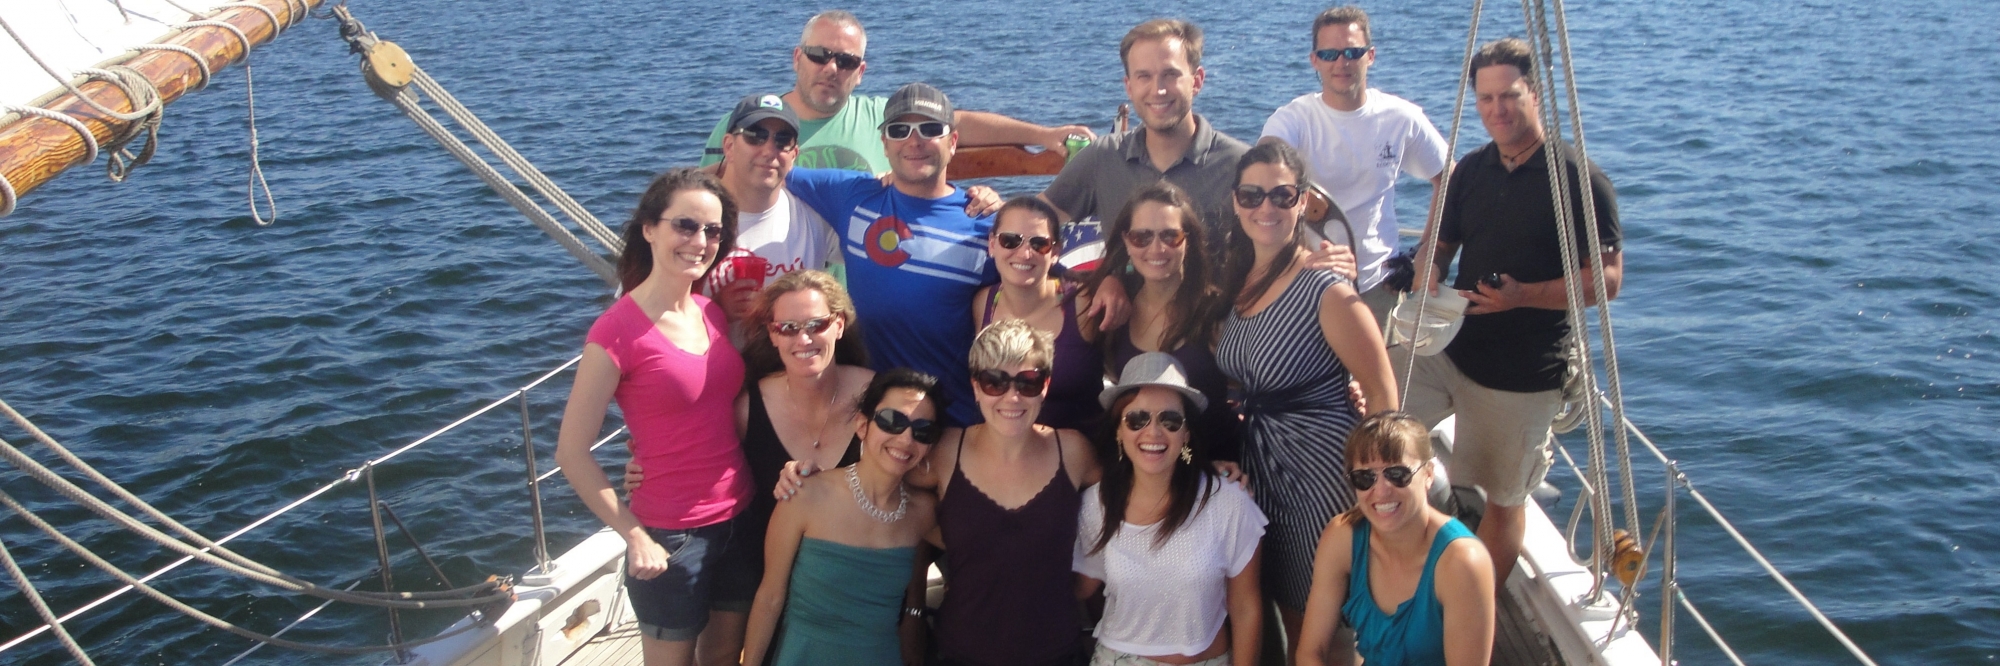 Southern Explorations team on a sail boat